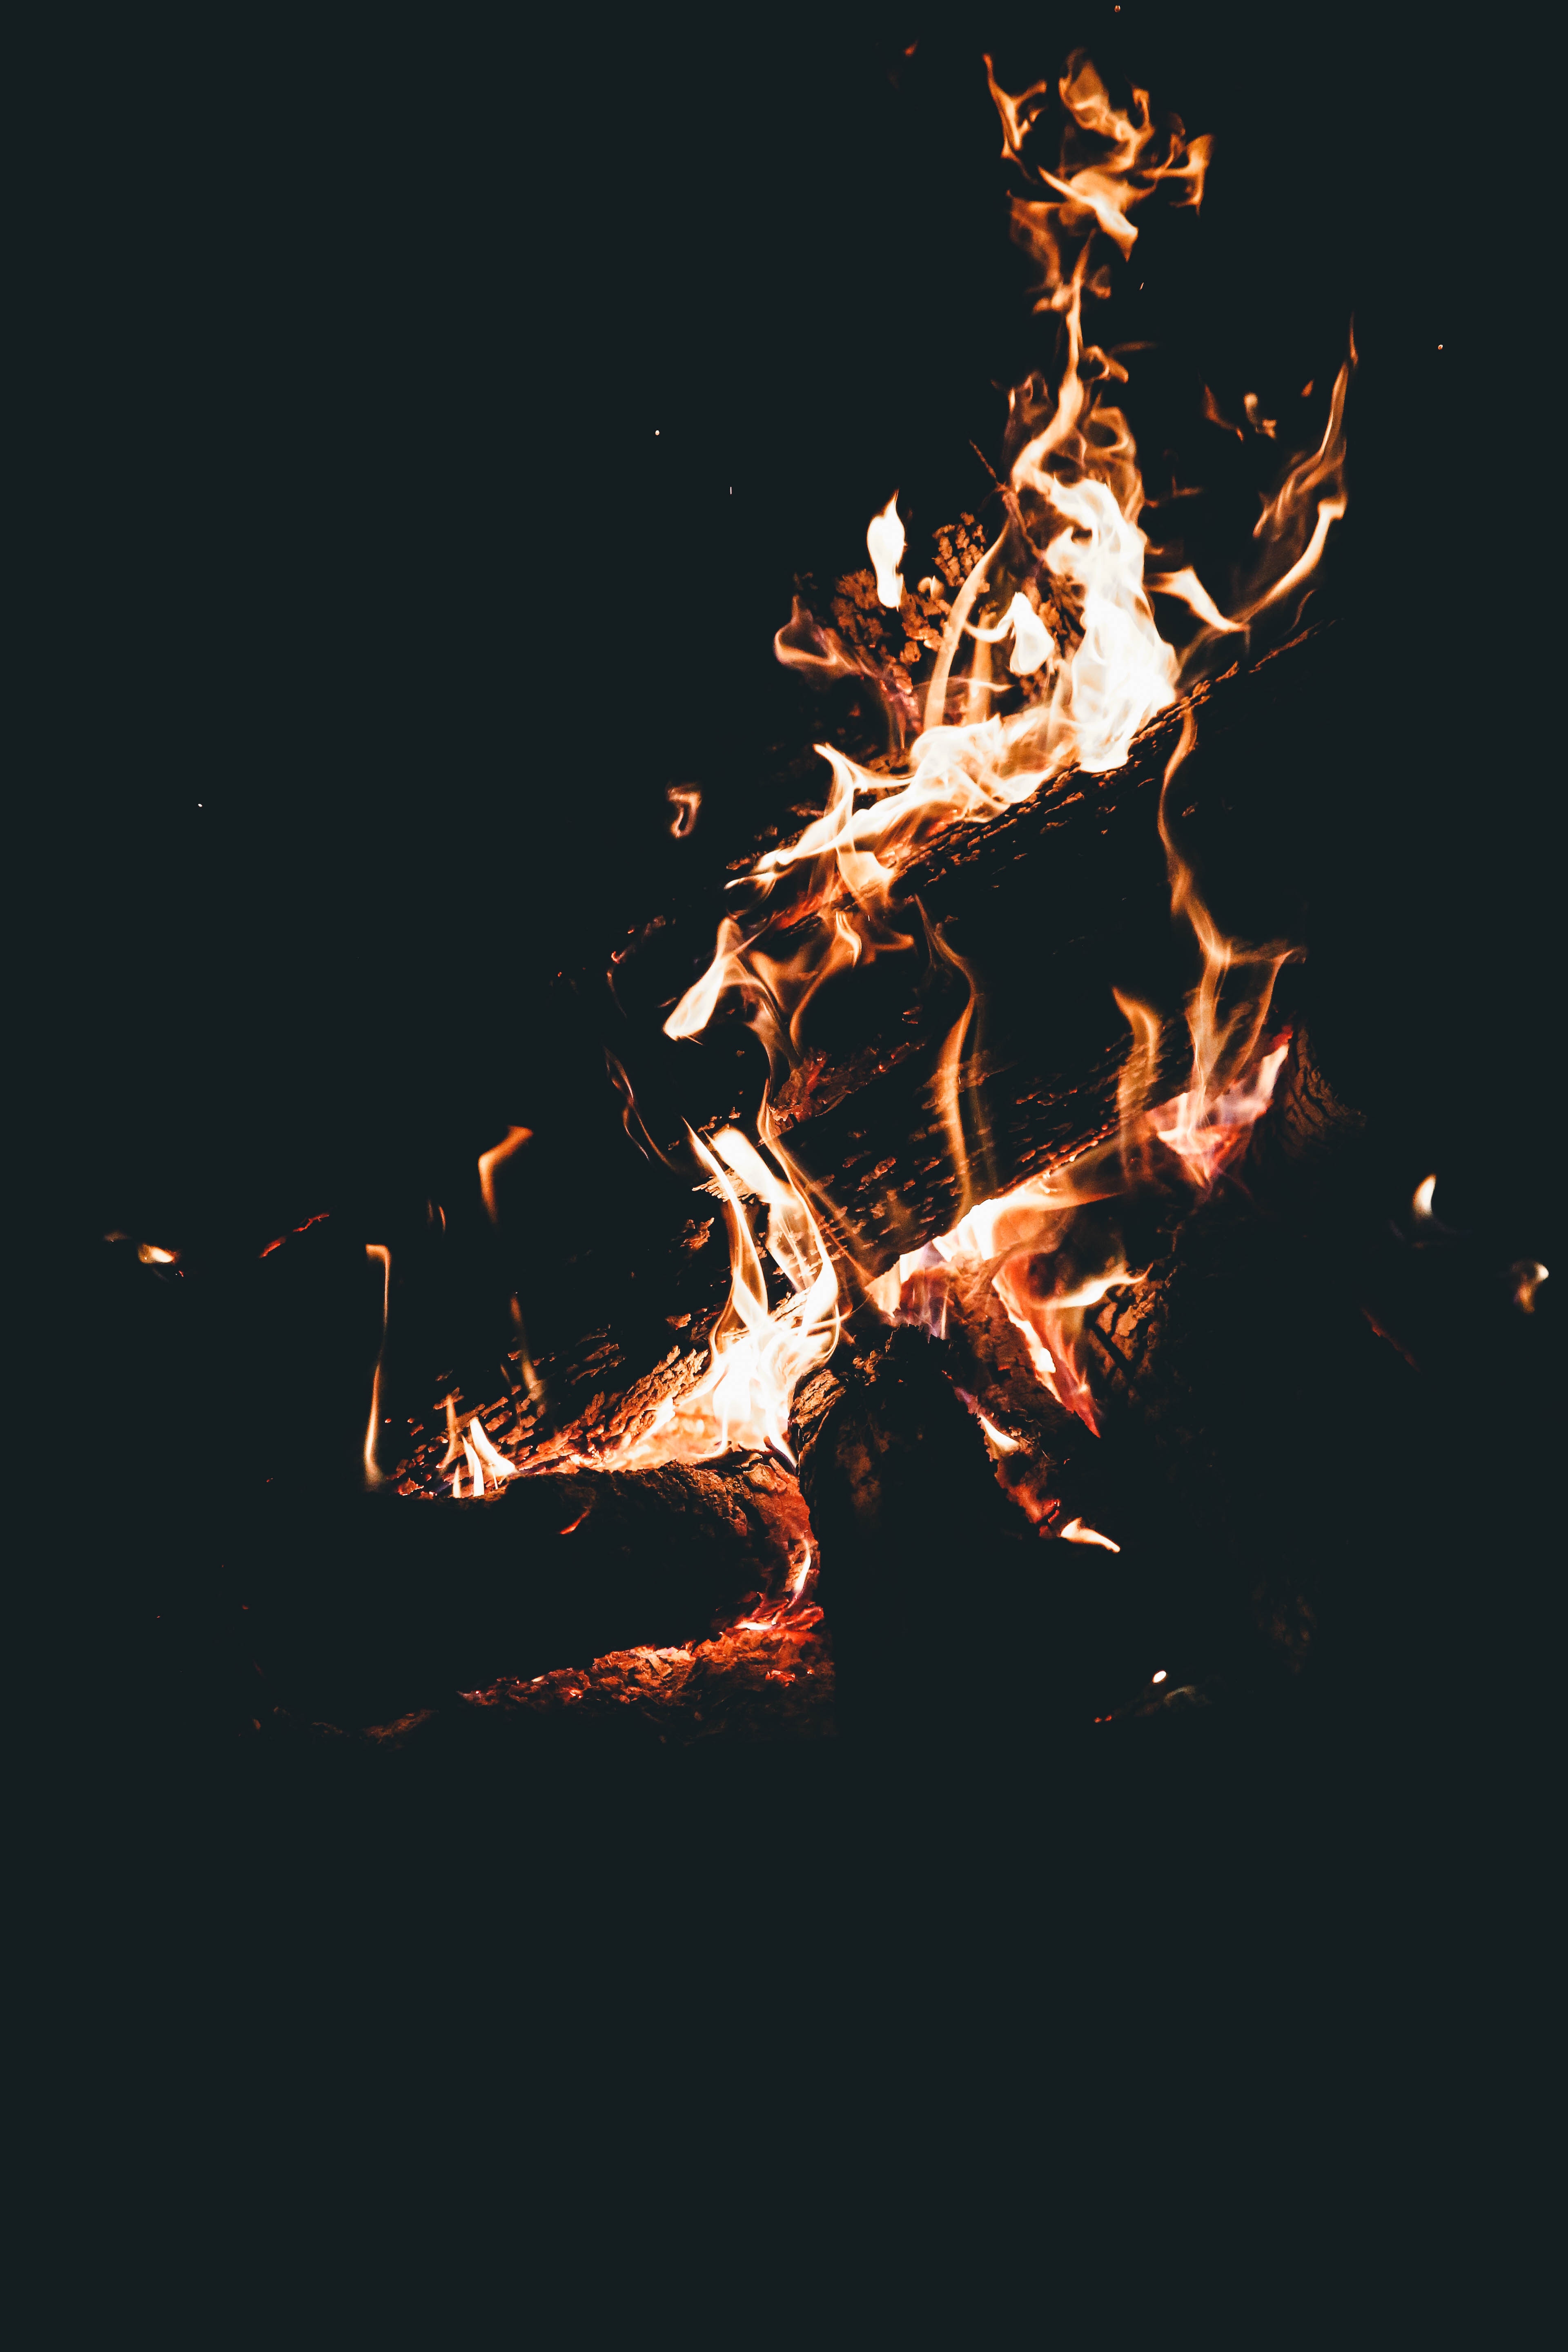 flame, bonfire, dark, fire, firewood, camping, campsite, combustion images